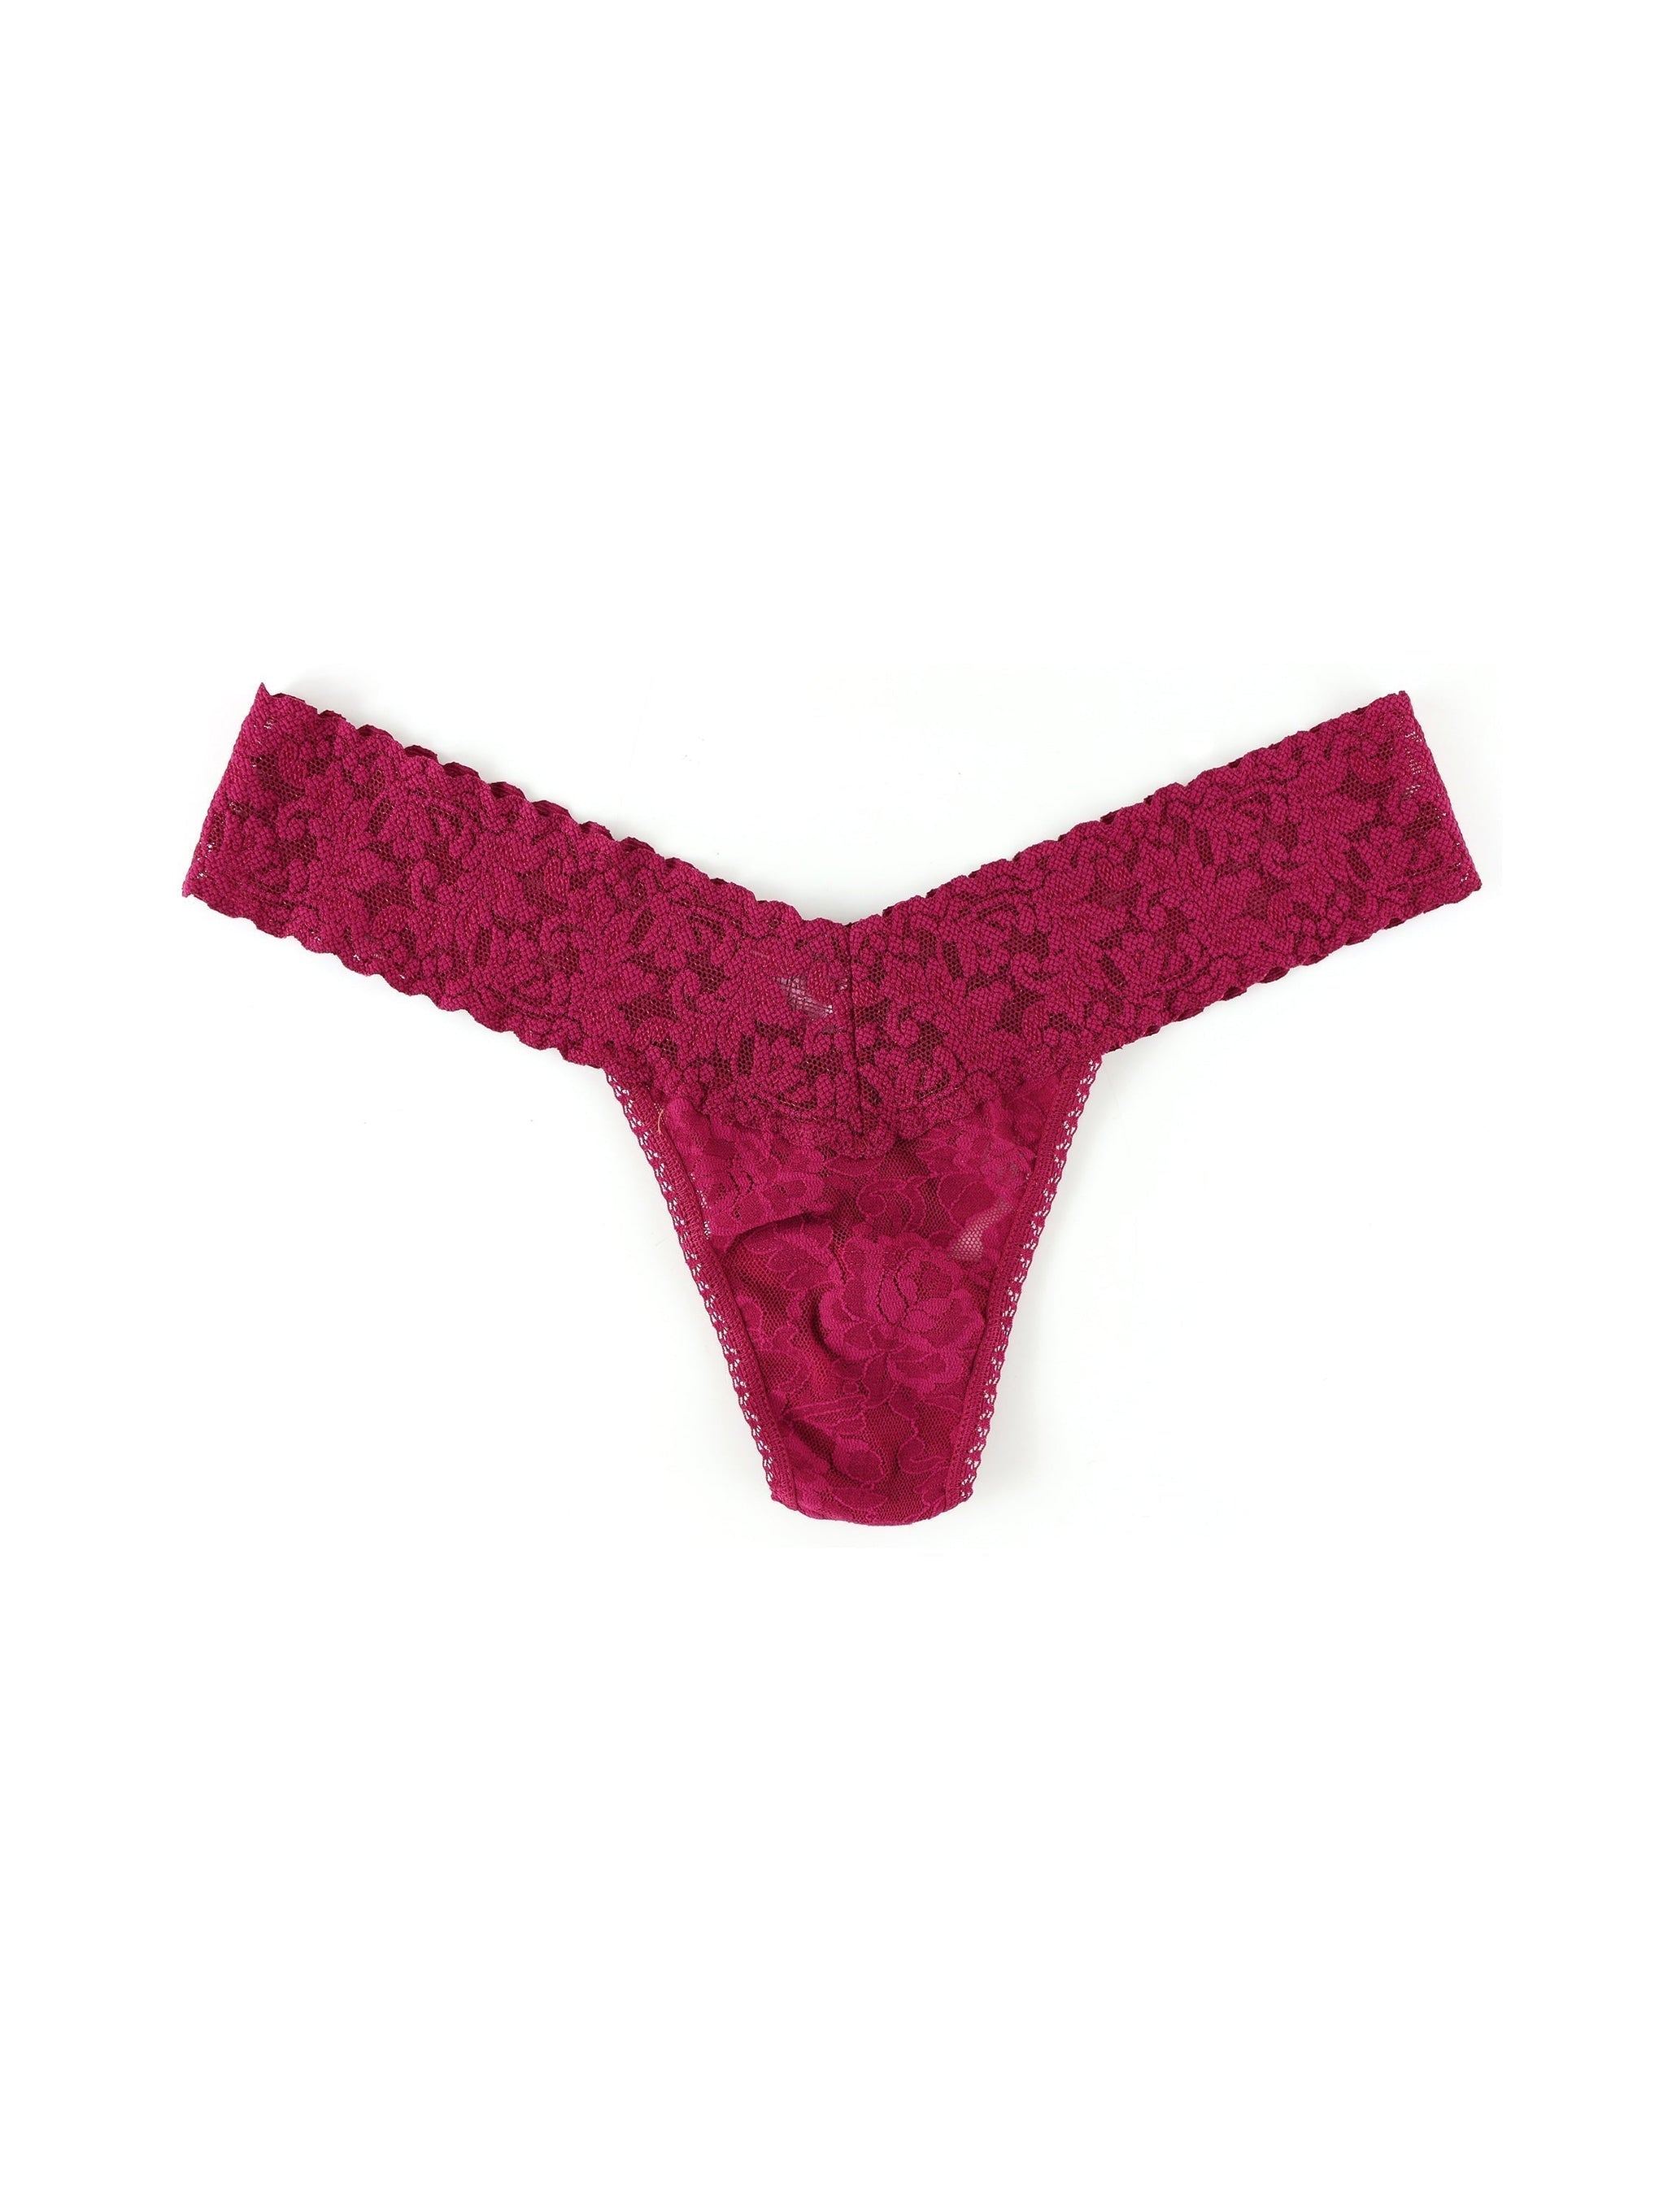 Petite Size Signature Lace Low Rise Thong Dark Pomegranate Red